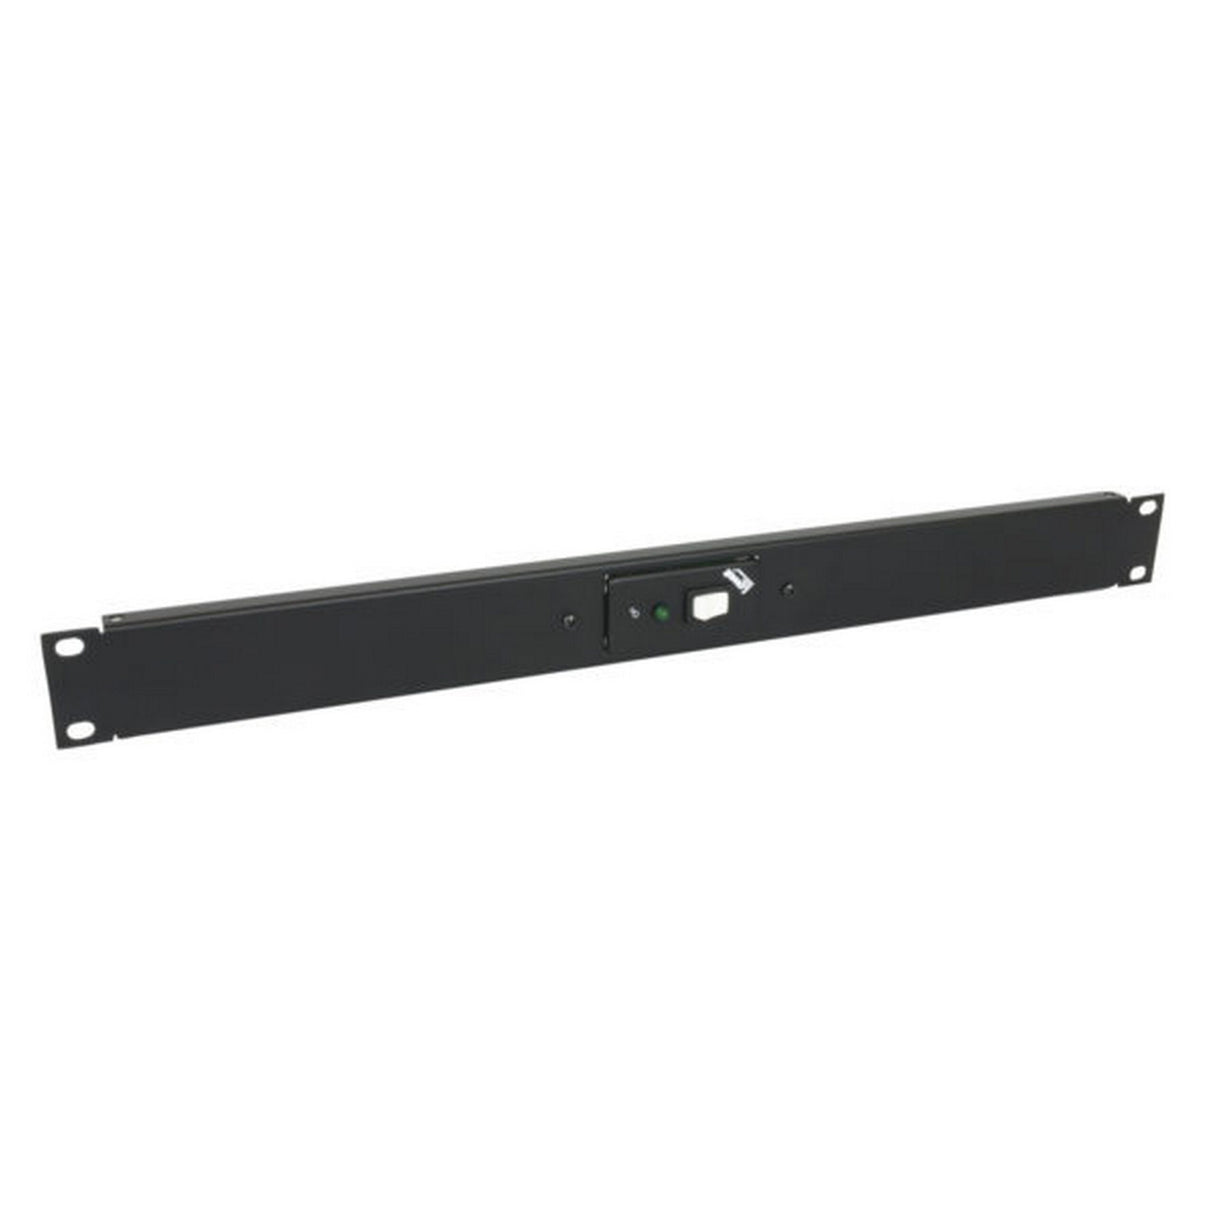 Lowell RPSB-R Maintained Single Pole Single Throw Low-Voltage Rackmount Switch